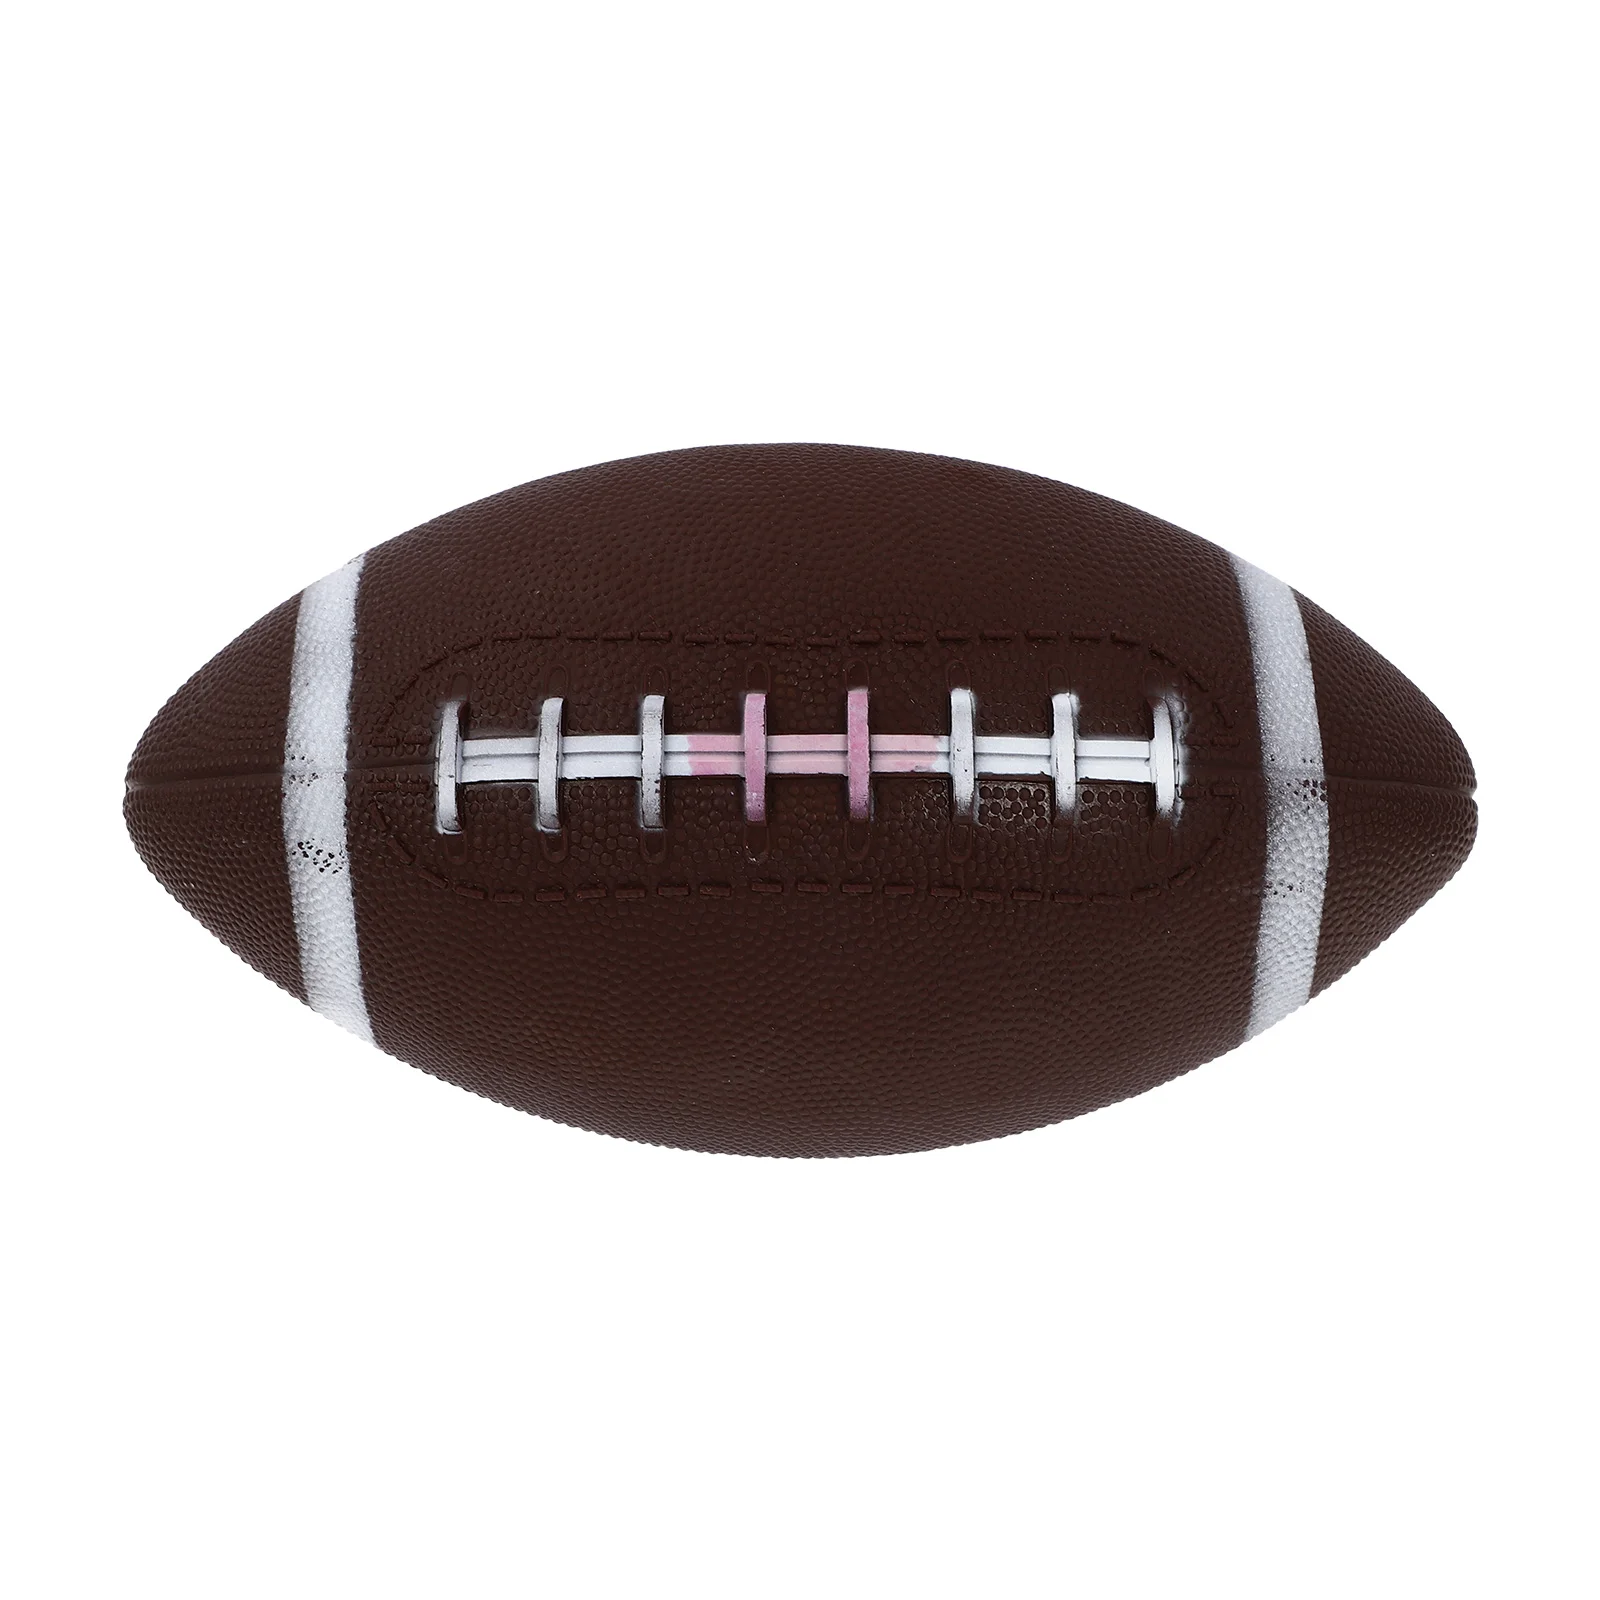 

Rugby Football Toy Toys American Exercising Beach Games Race Water Kids Style Footballs Gifts Standard Professional Outdoor Boys